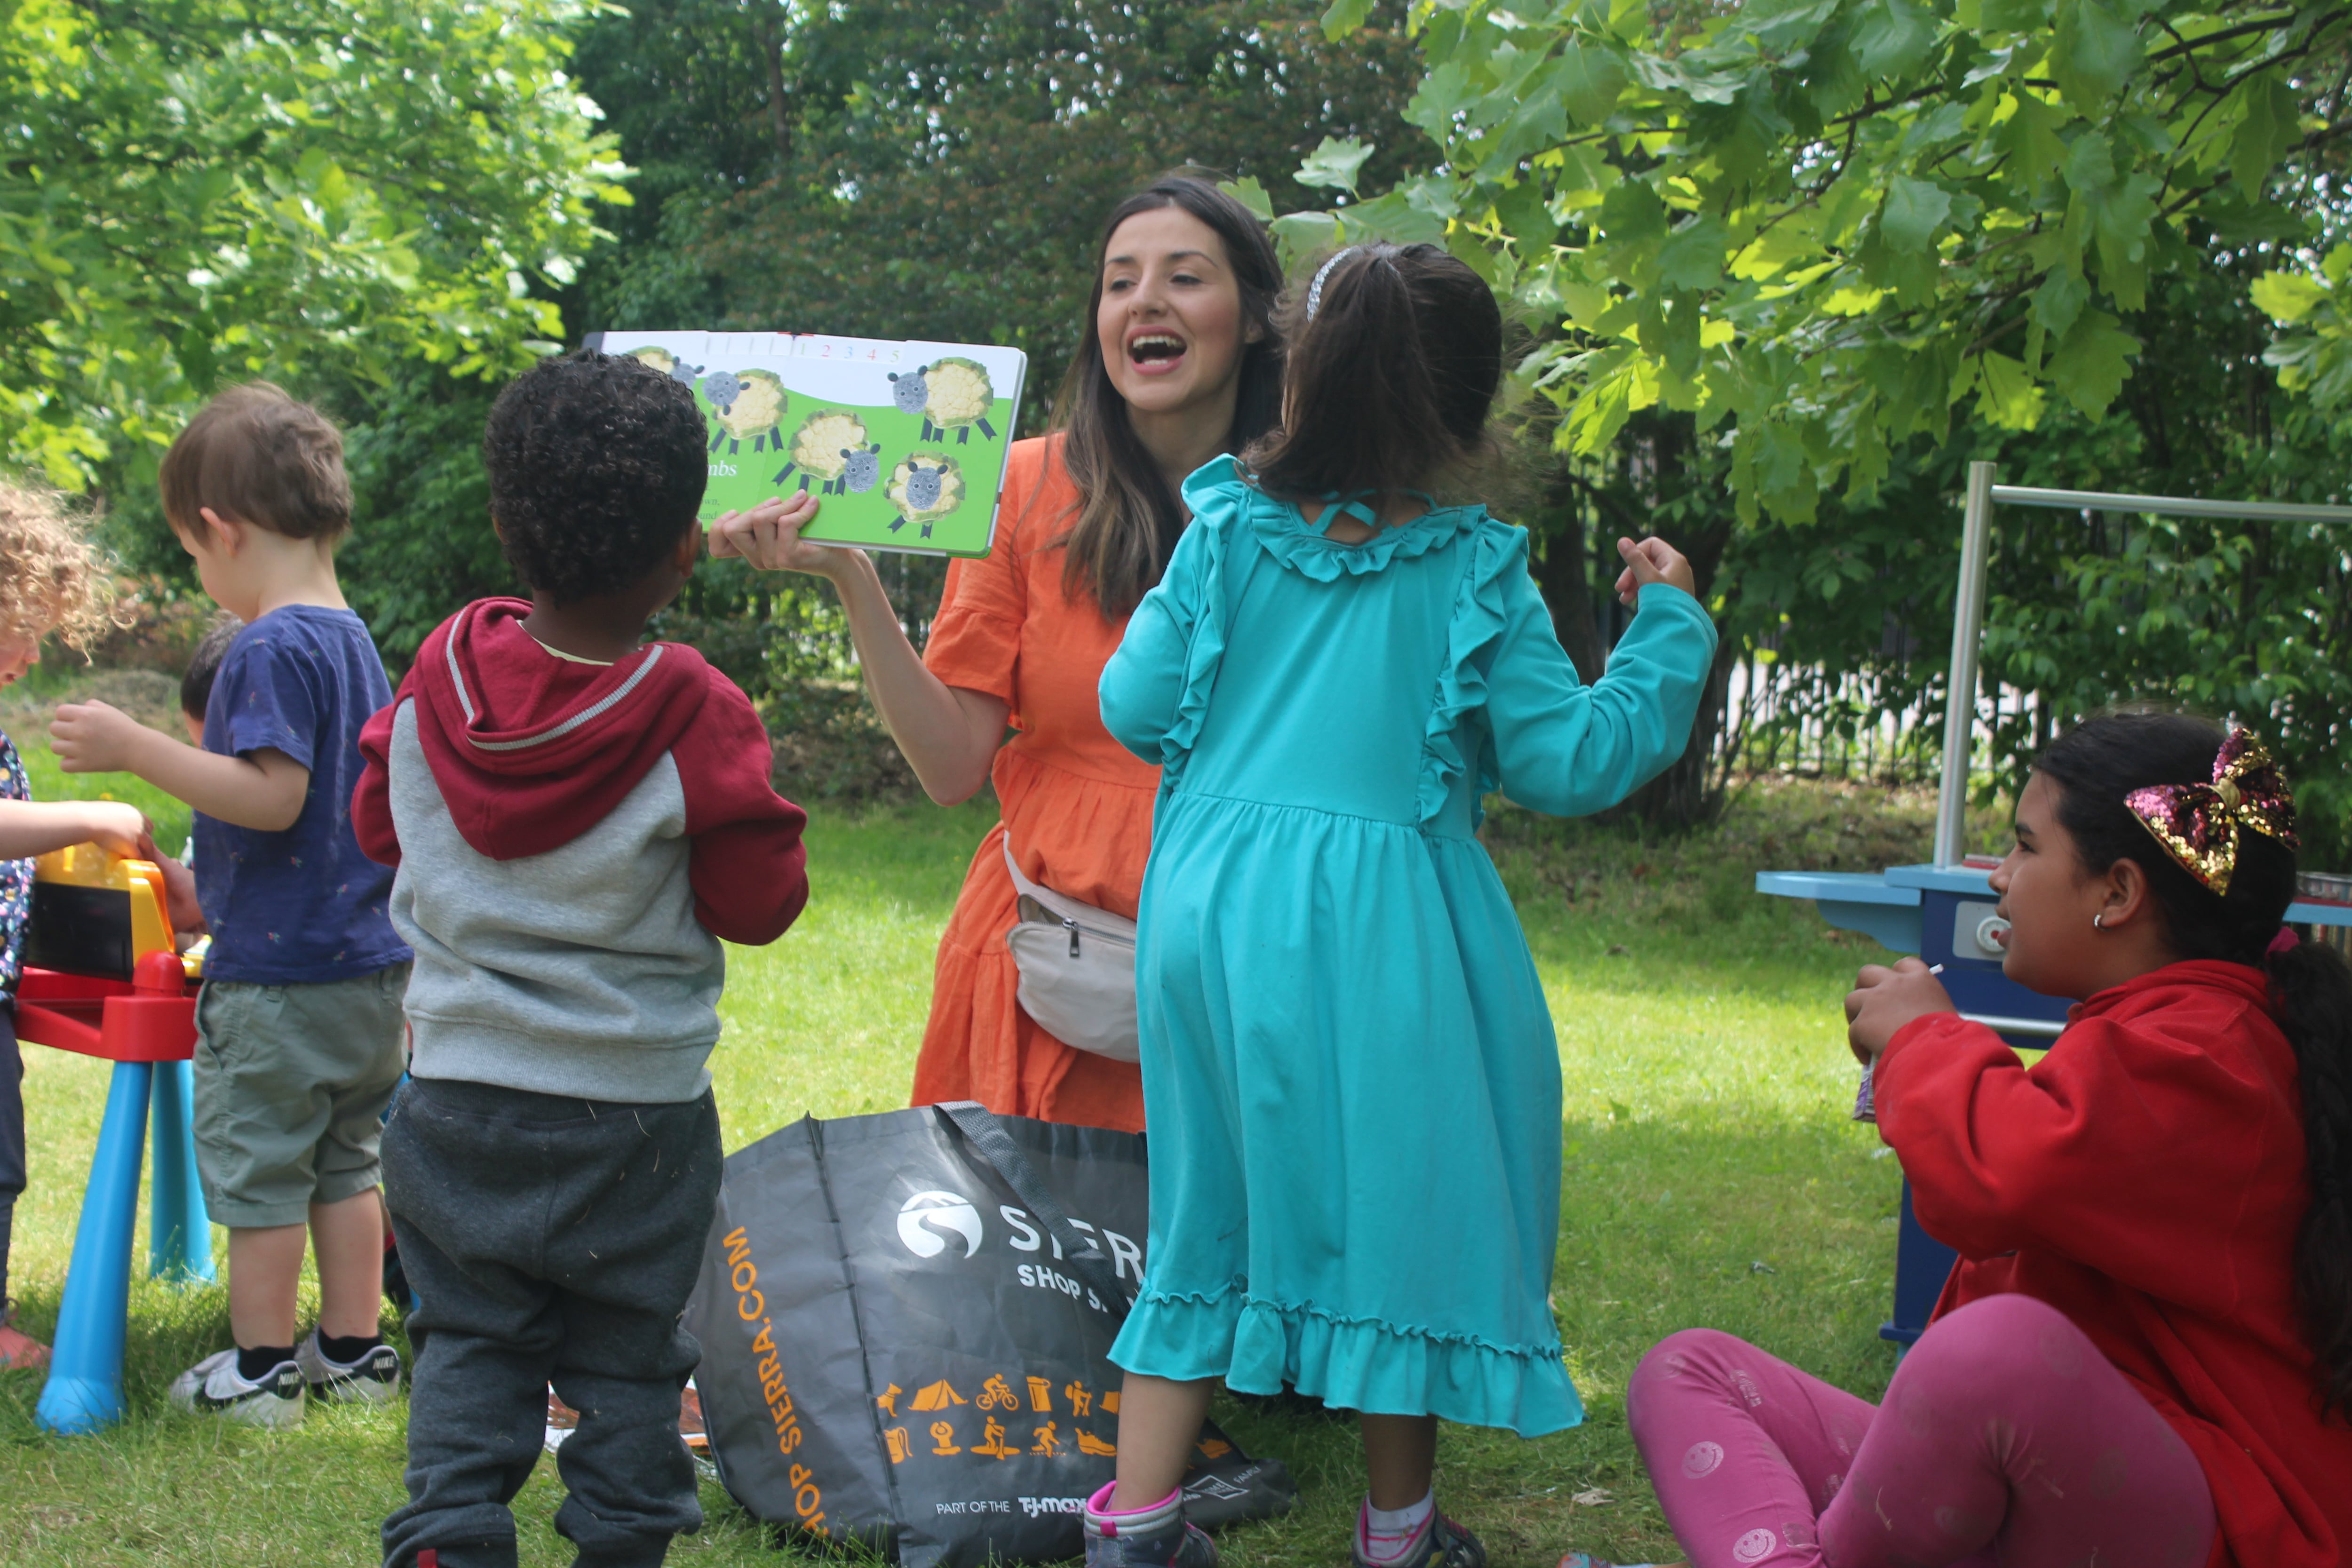 A woman with brown hair and a red dress laughs with four children of different ages while standing on grass in front of trees in a park.